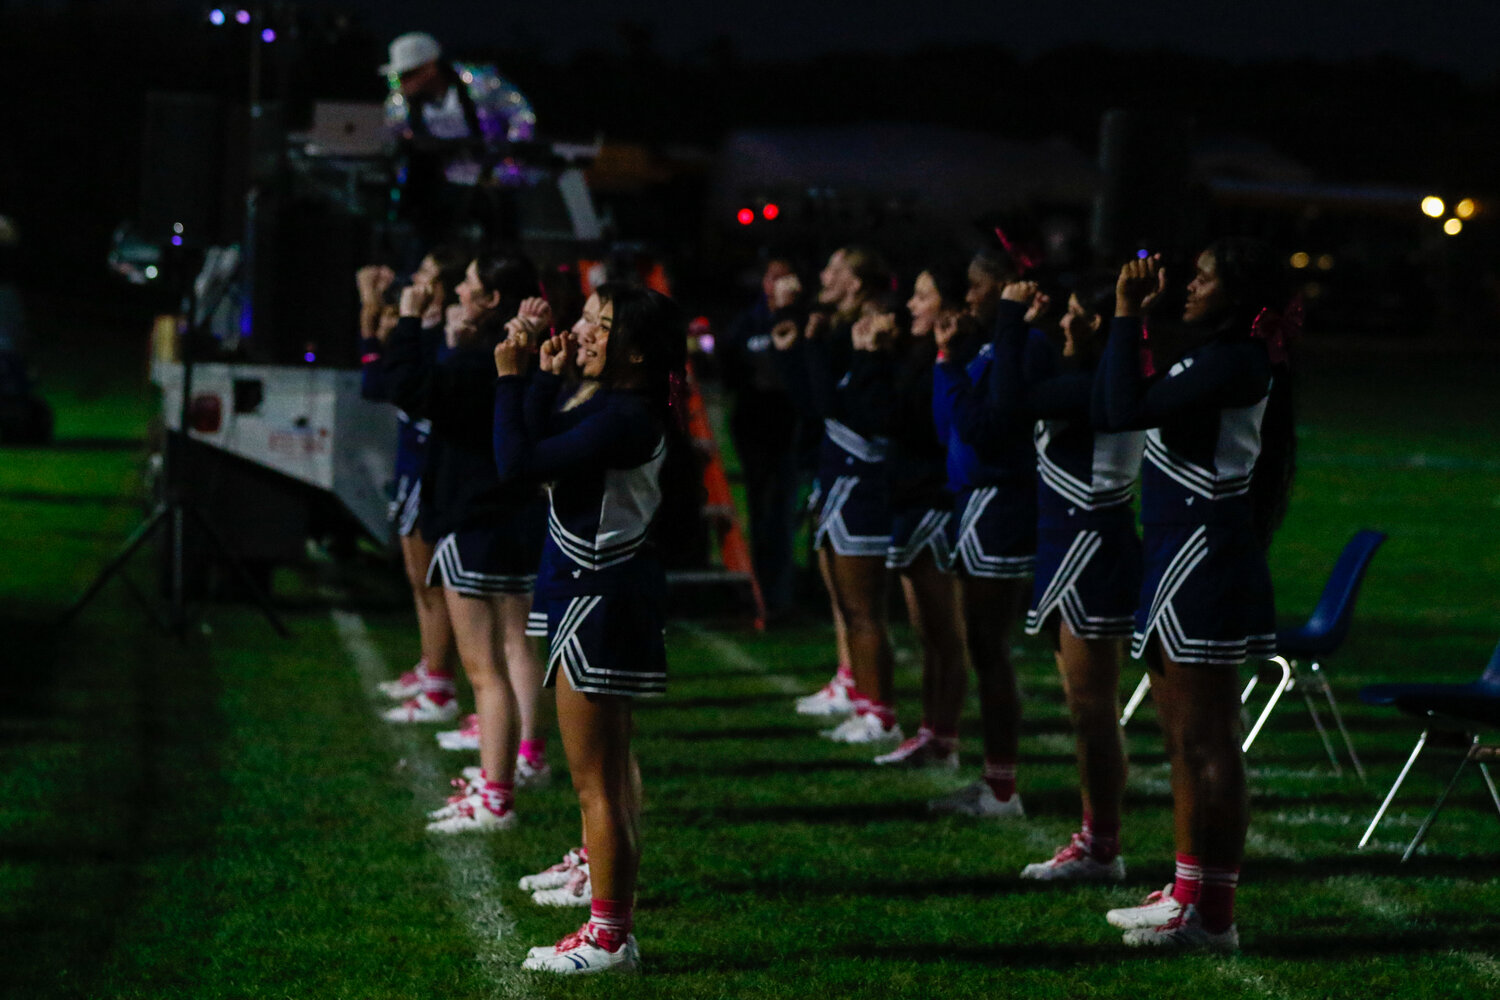 The annual Homecoming pep rally was held Friday night at Vito Capizzo Stadium, followed by a bonfire and pig roast.